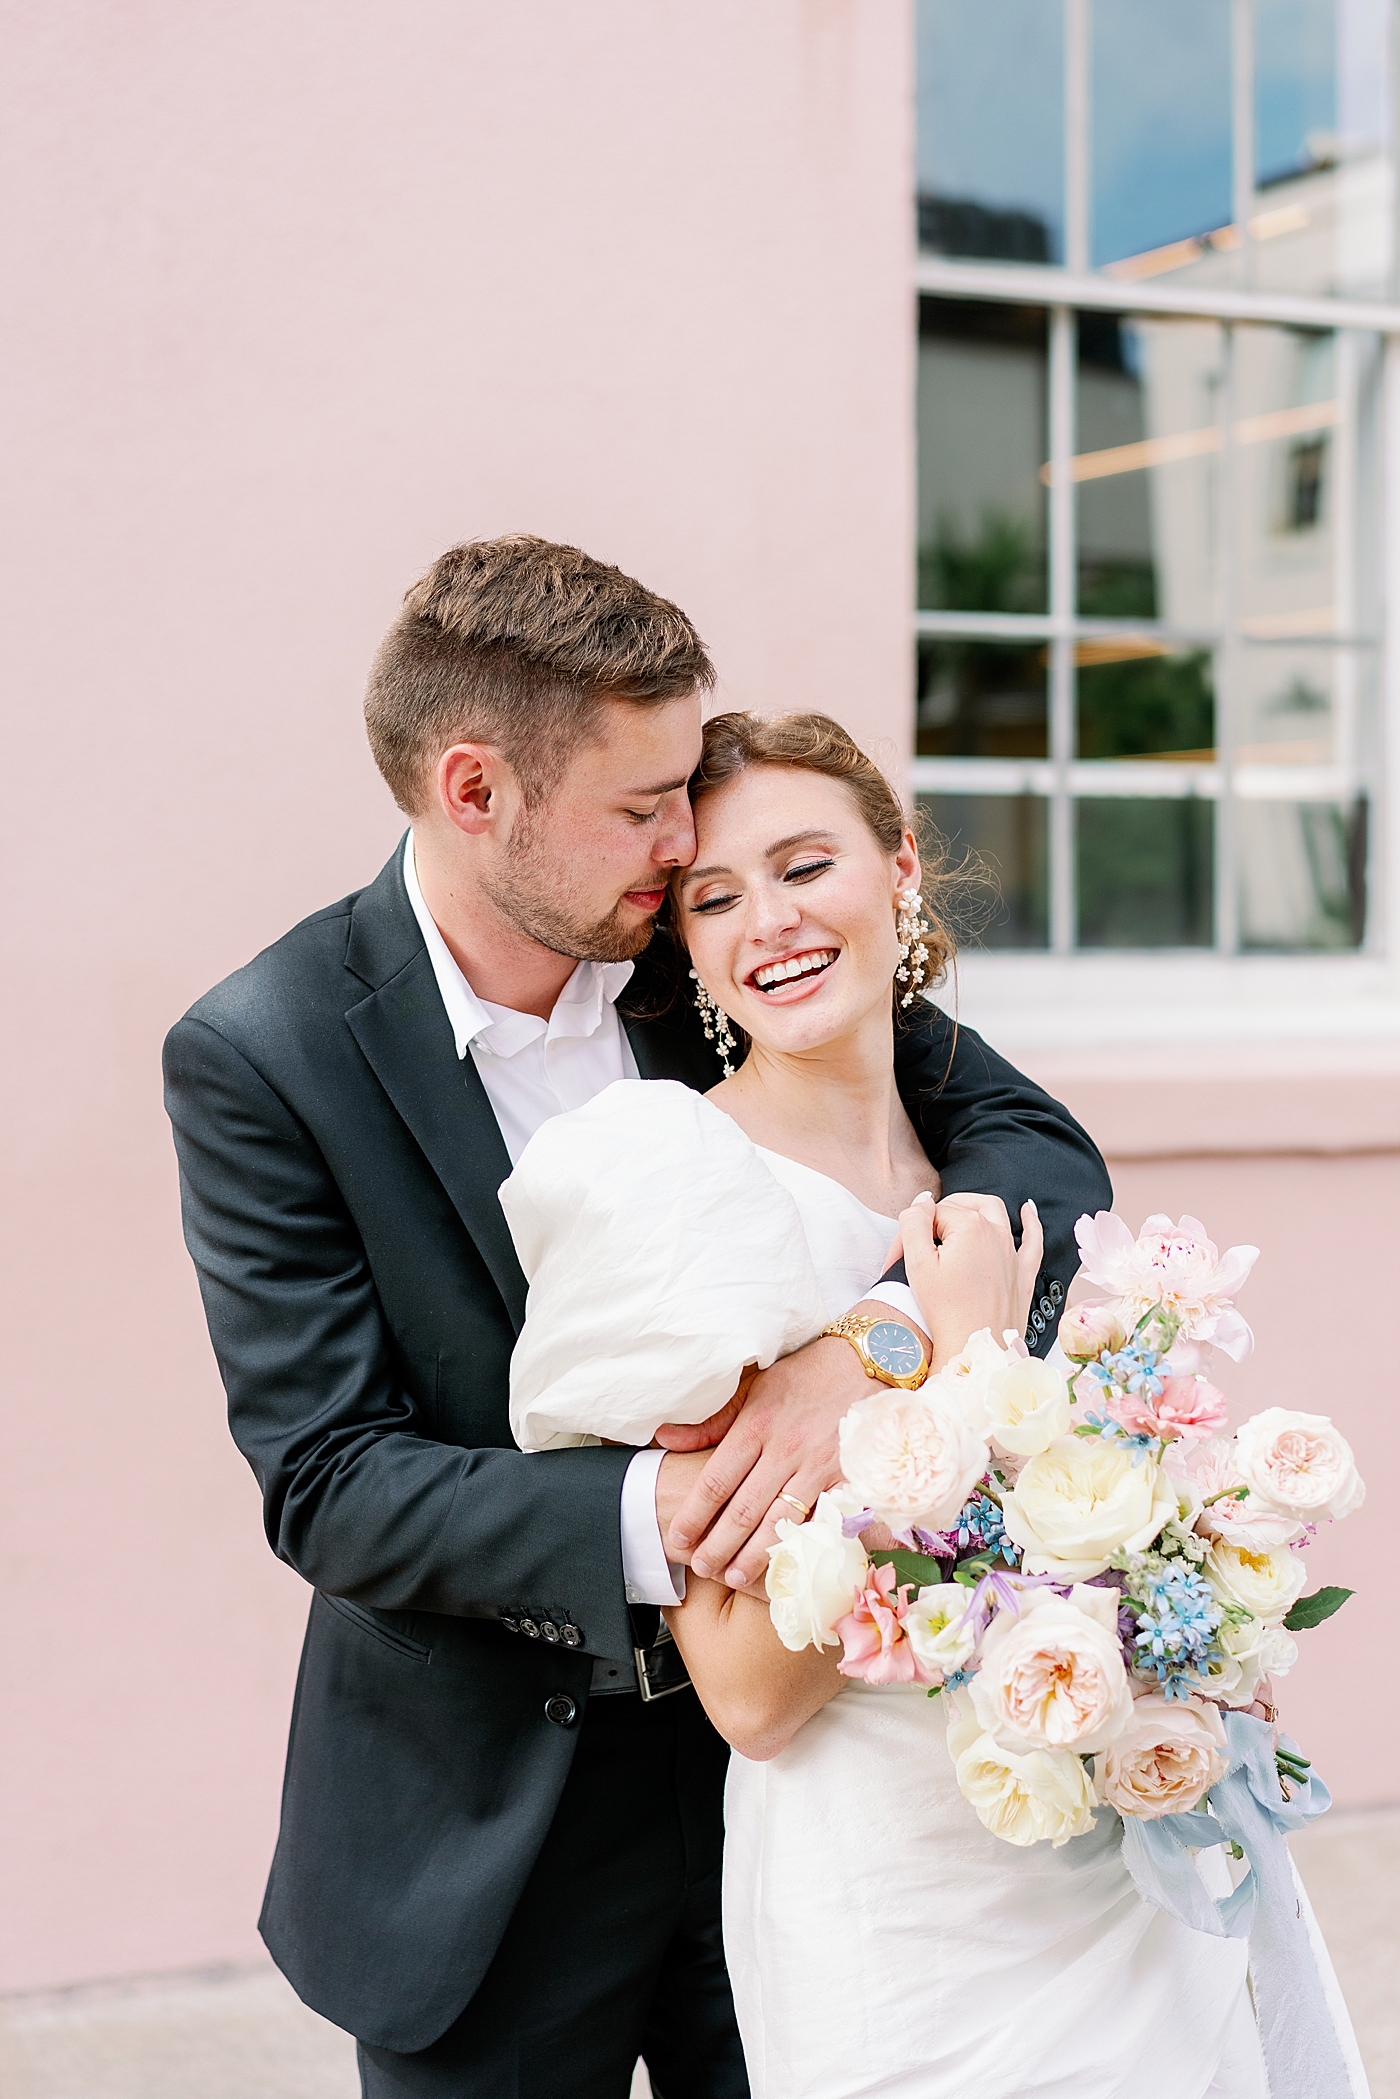 Bride and groom snuggling in front of pink wall during Elevated City Hall Elopement in Charleston | Images by Annie Laura Photo